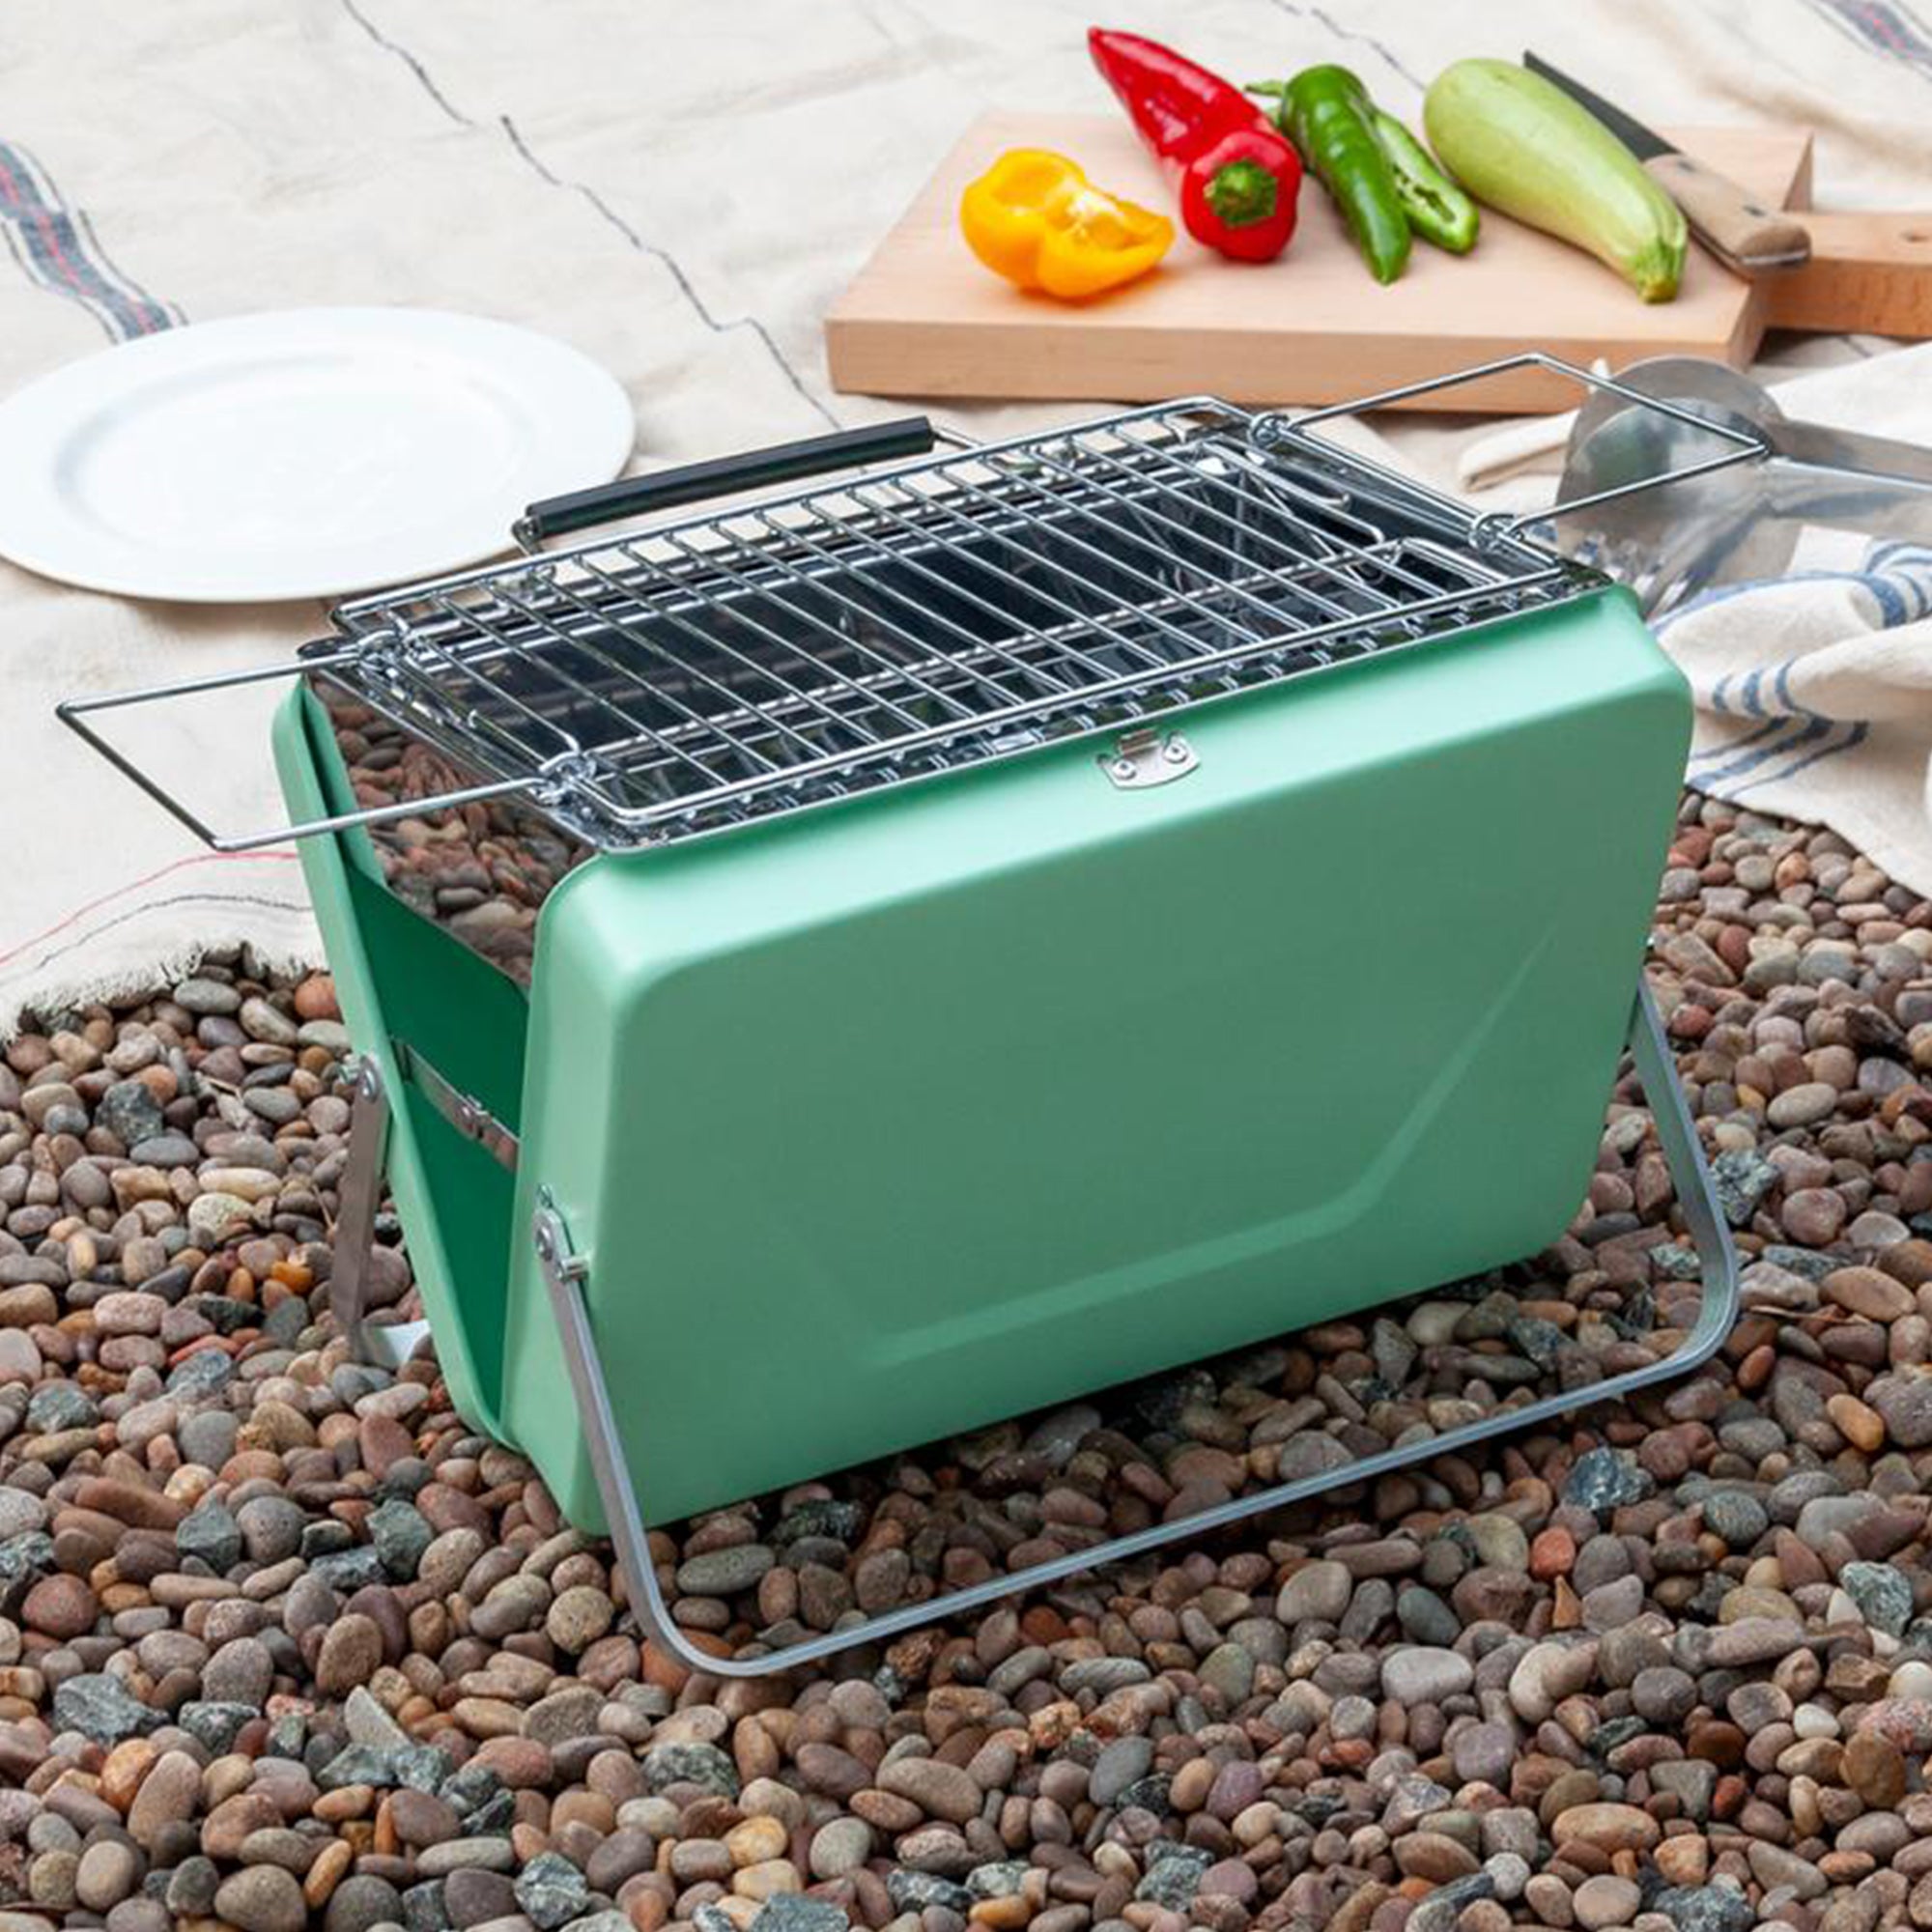 Portable Barbecue - Barbecue Gift for Dad - Foldable Camping BBQ